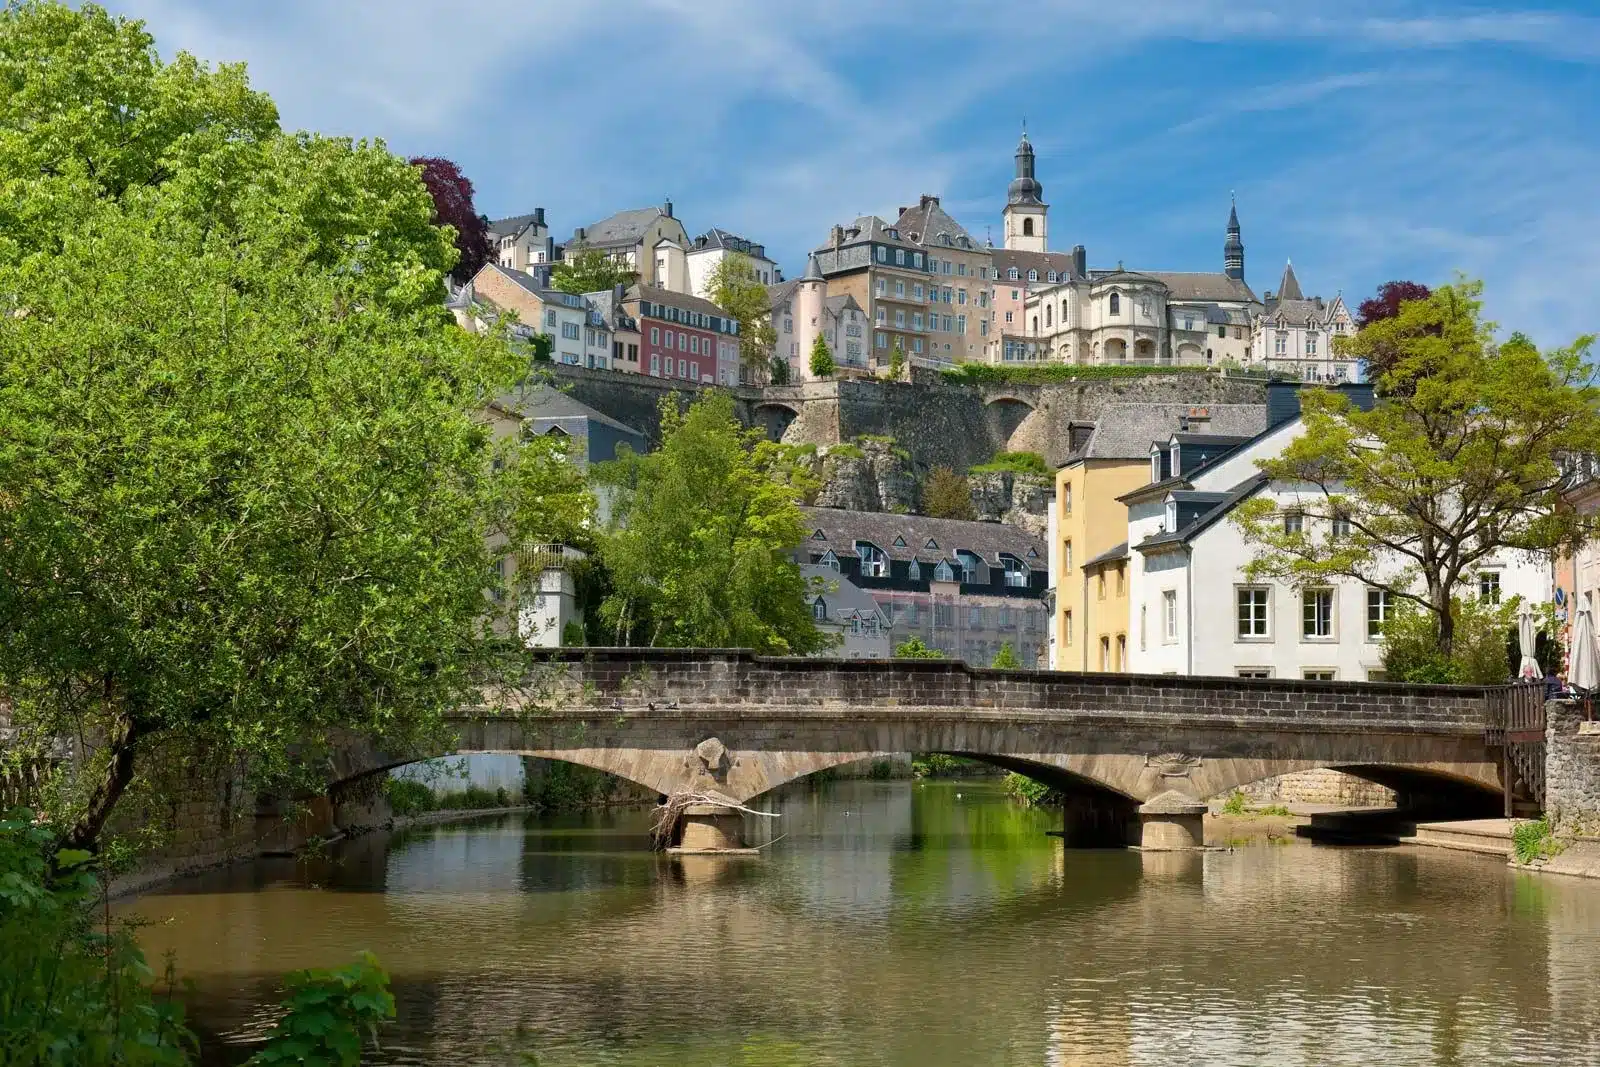 What Are the Highlights of Luxembourg?